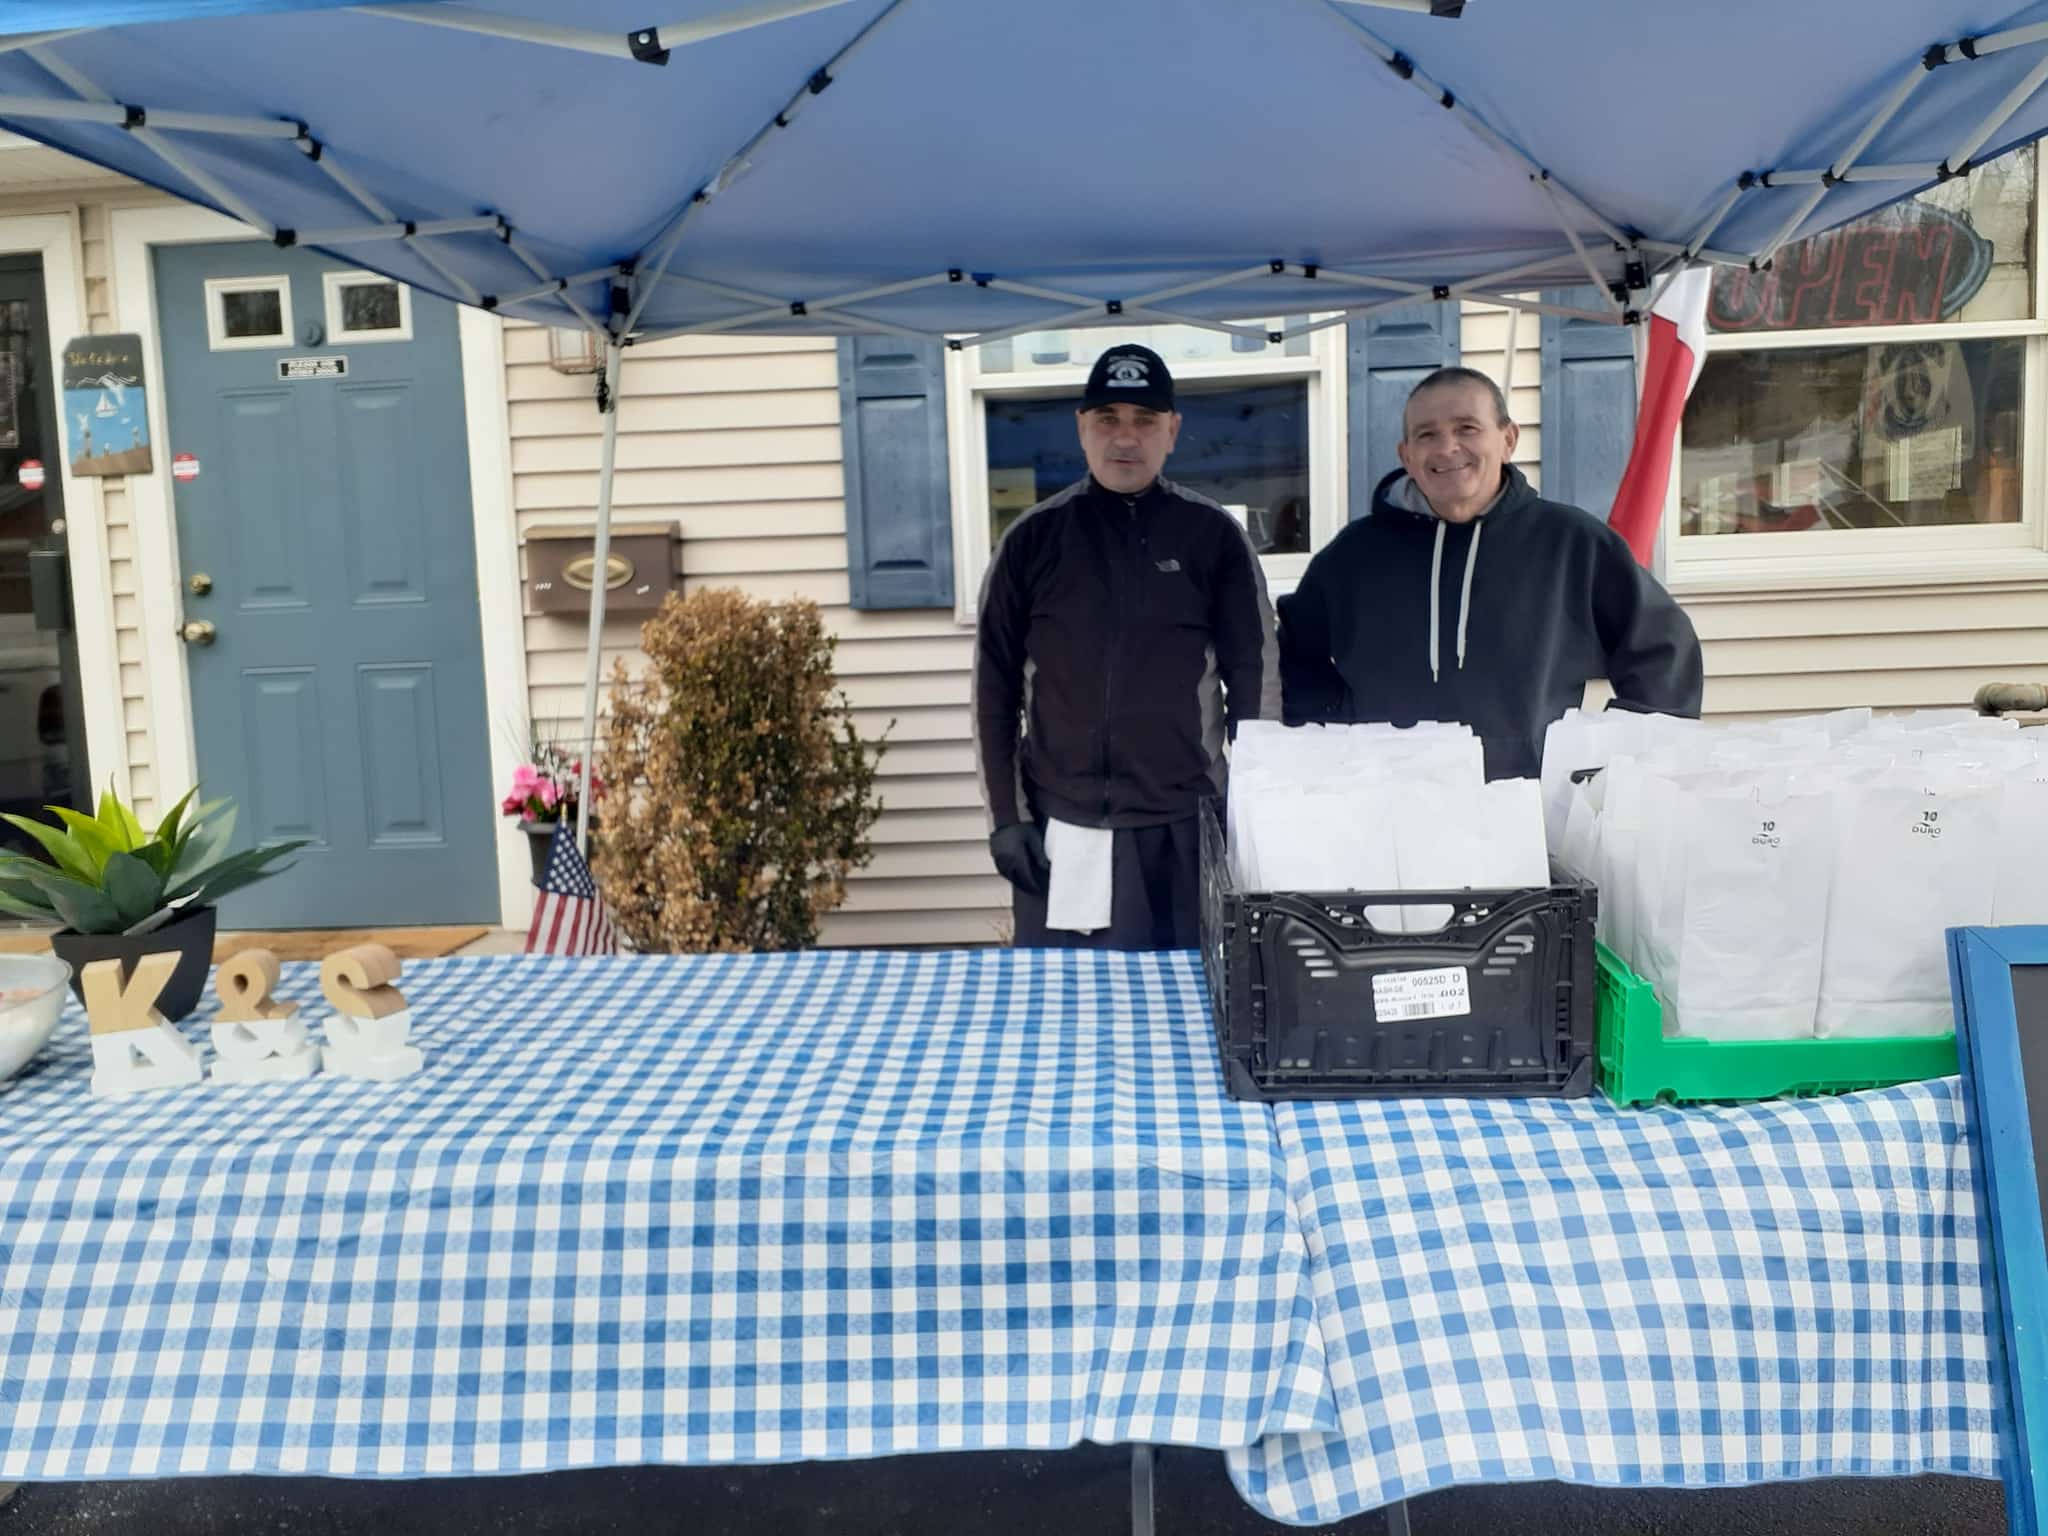 [COURTESY PHOTO] Kim-&-Steve's-Masthead-Grill is giving free take-out lunches to shut-in families during the COVID-19 outbreak. Restaurant employees, from left, Chuckie and Gary, were handing out the lunches Monday.